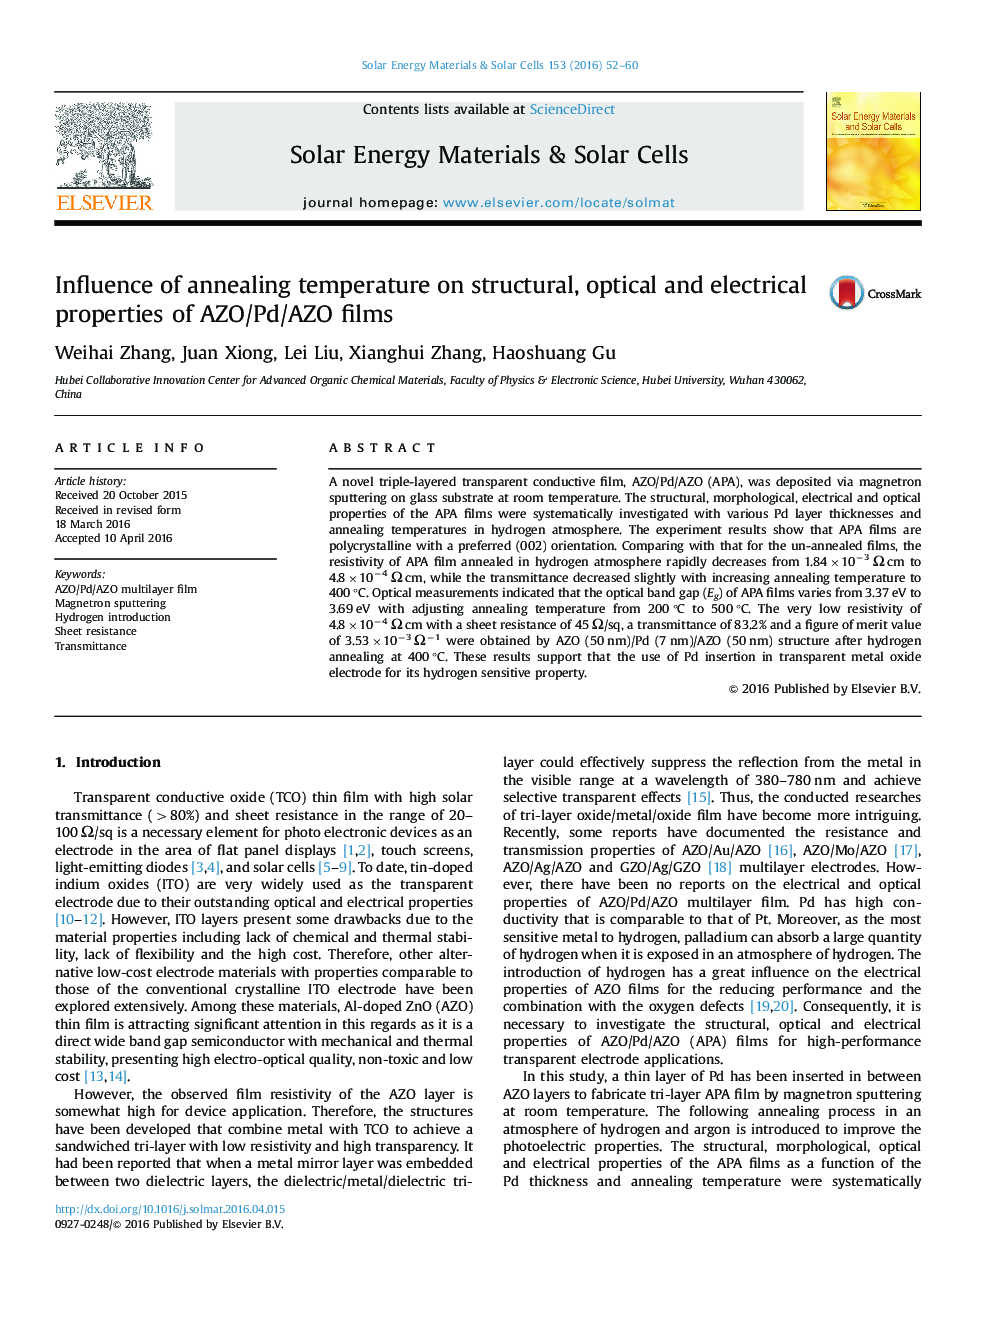 Influence of annealing temperature on structural, optical and electrical properties of AZO/Pd/AZO films